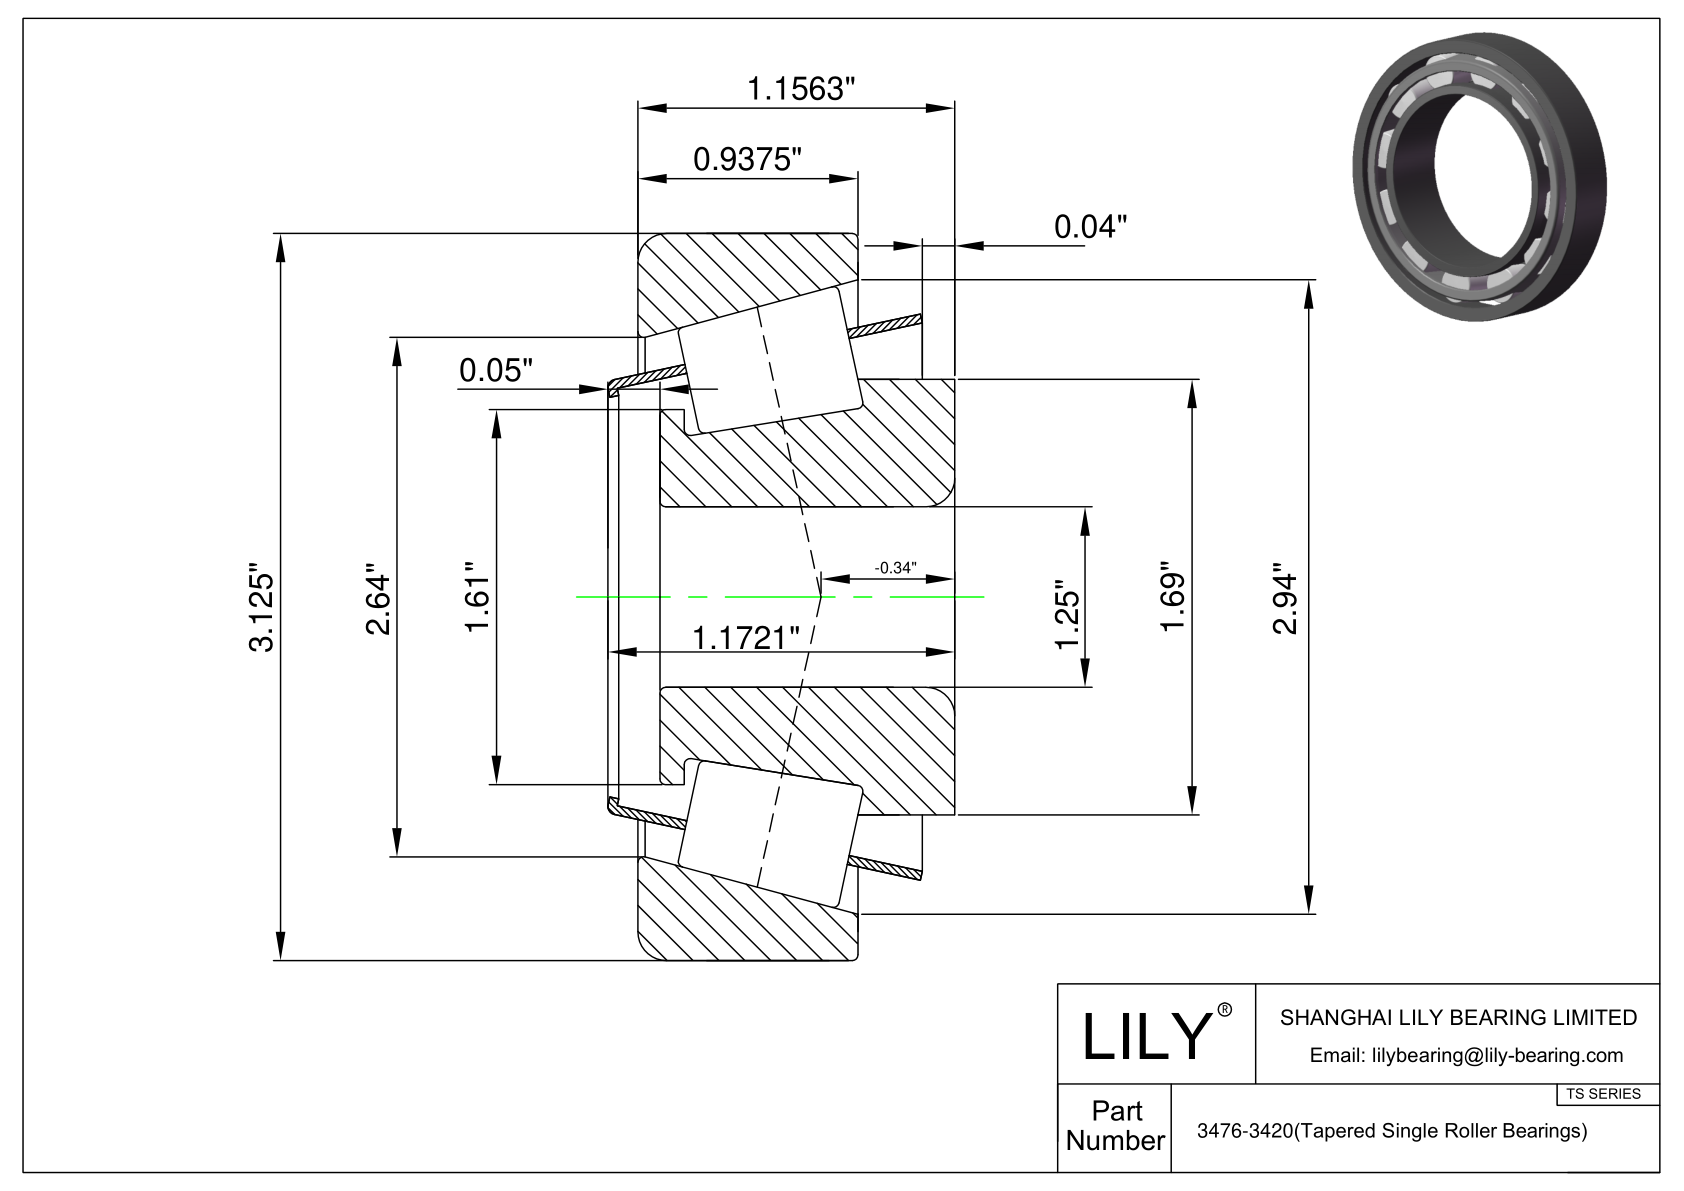 3476-3420 TS (Tapered Single Roller Bearings) (Imperial) cad drawing